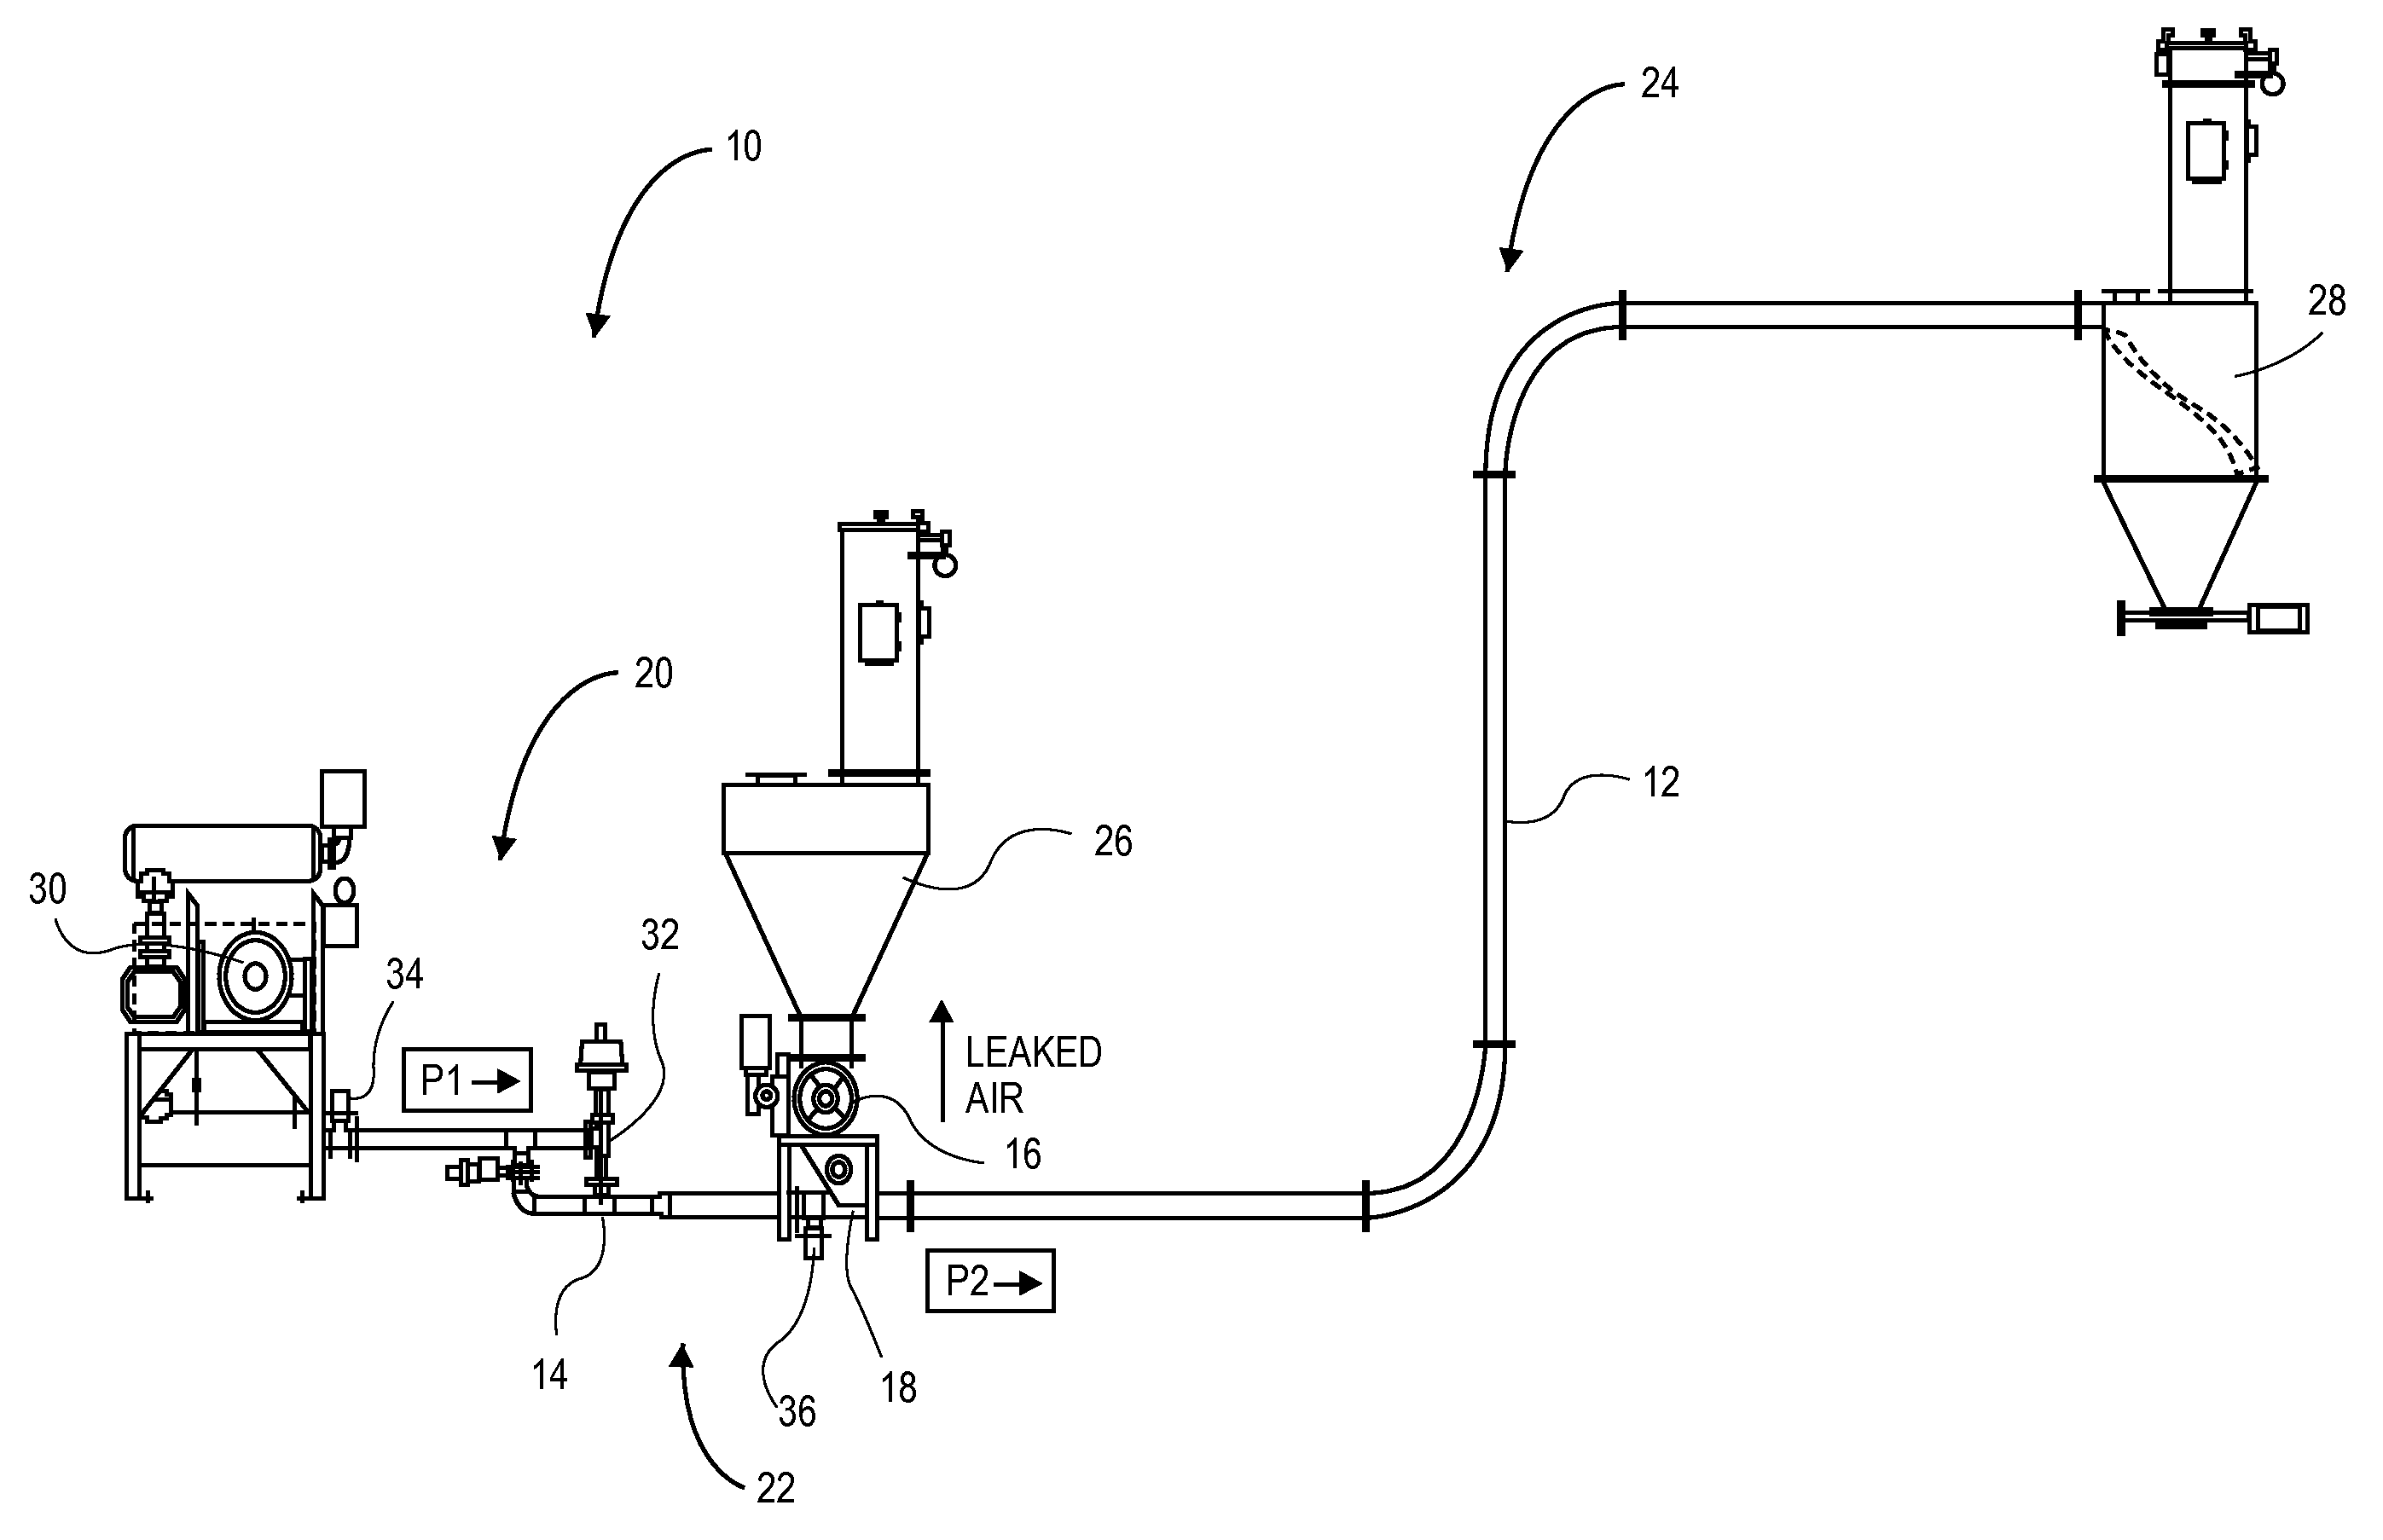 Low pressure continuous dense phase convey system using a non-critical air control system